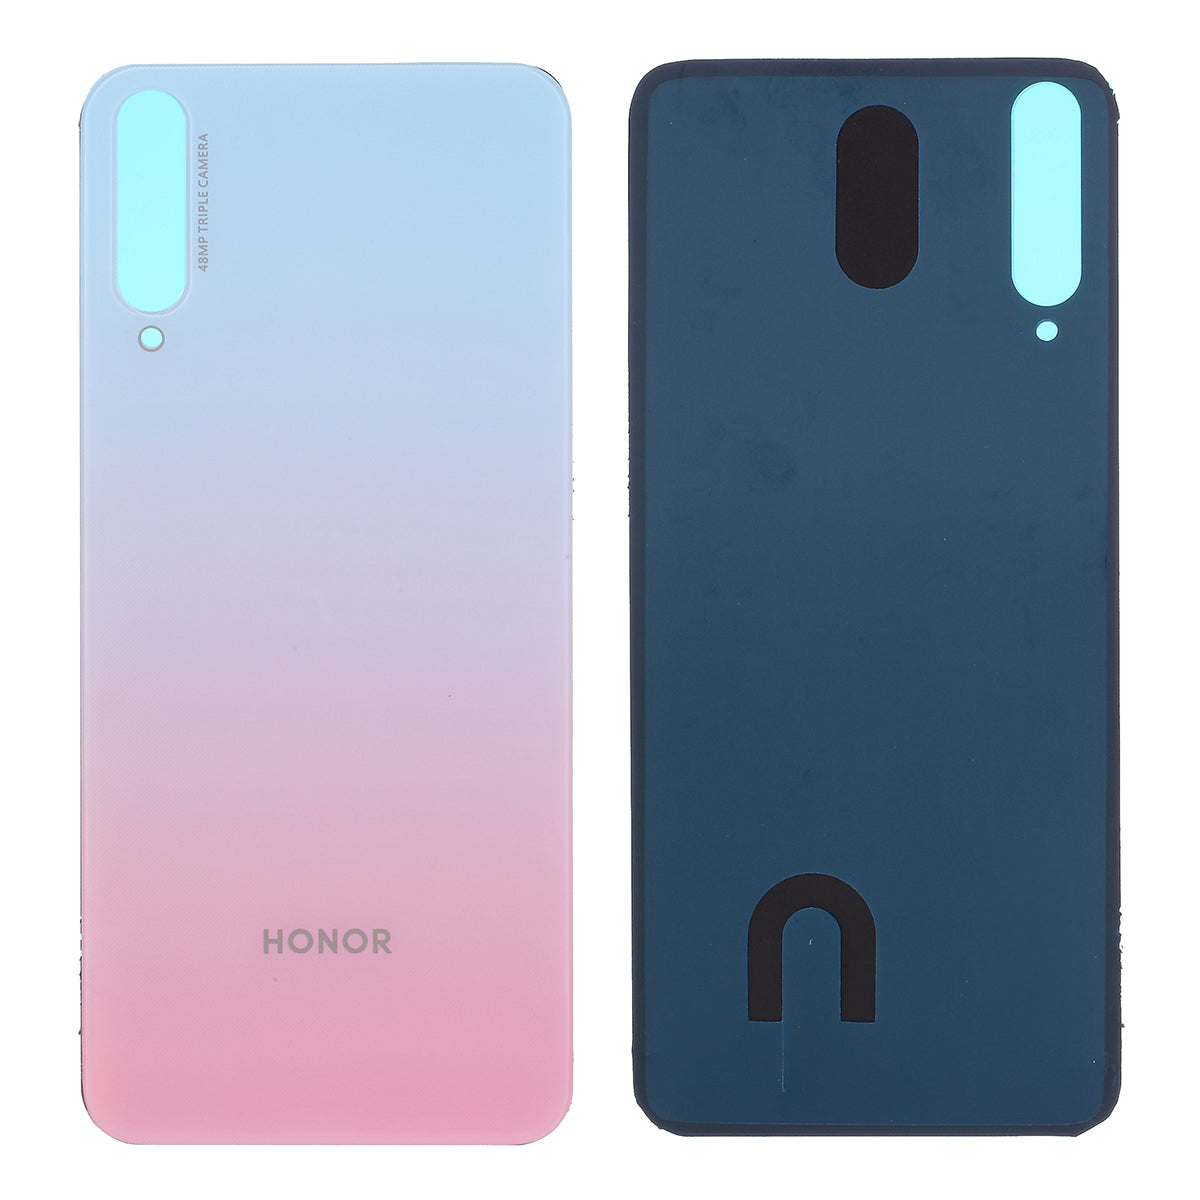 OEM Battery Housing with Adhesive Sticker for Honor 20 lite HRY-LX1T - Pink / Blue